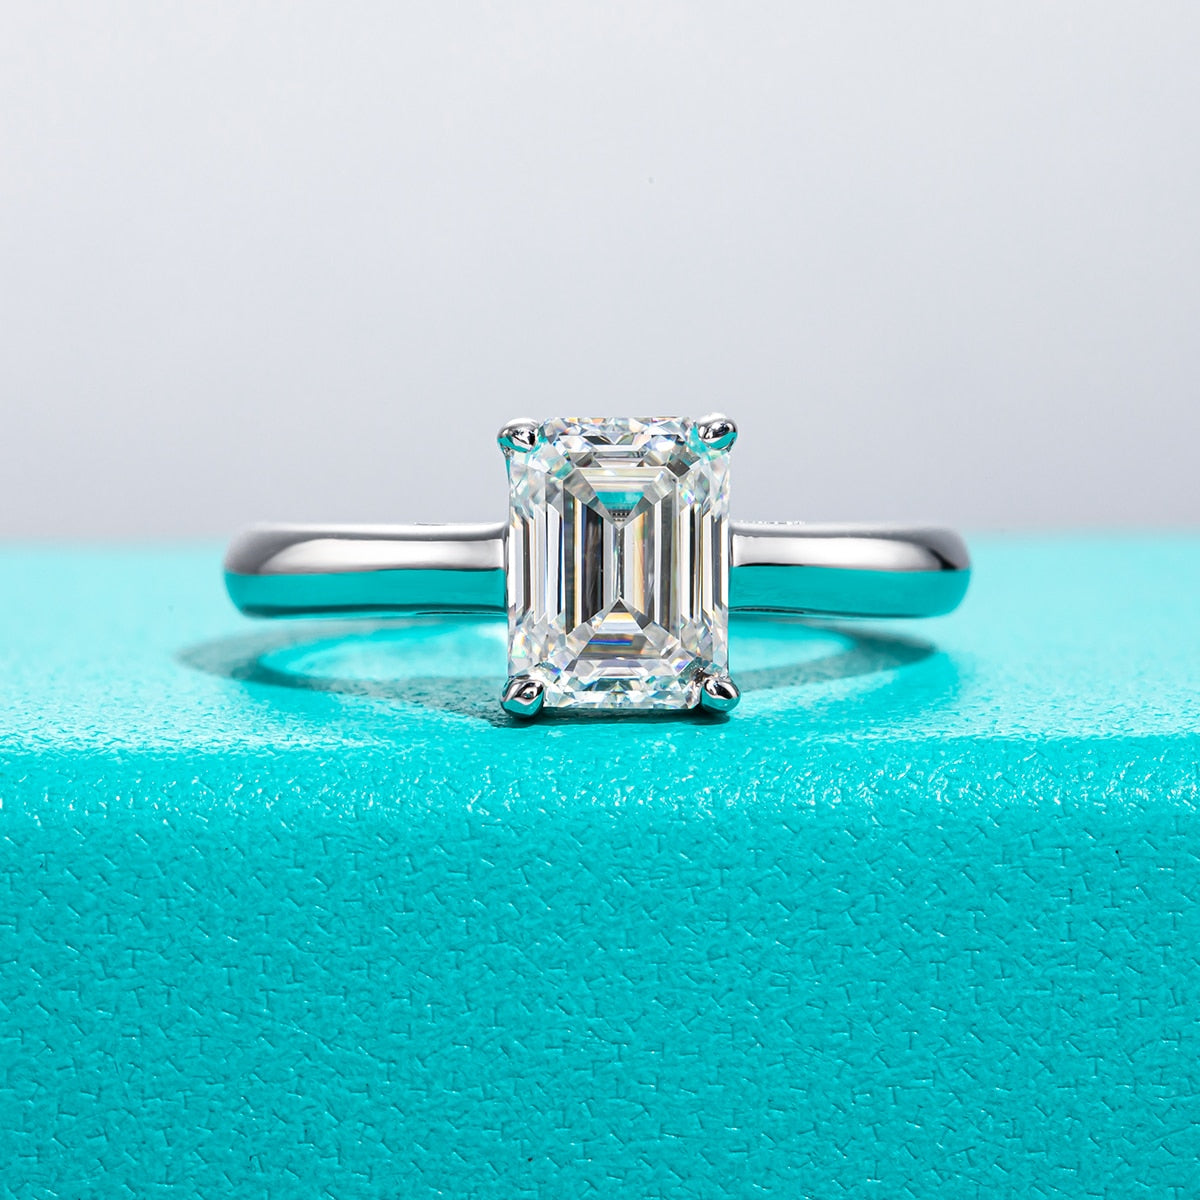 A 2CT emerald cut moissanite sterling silver ring.